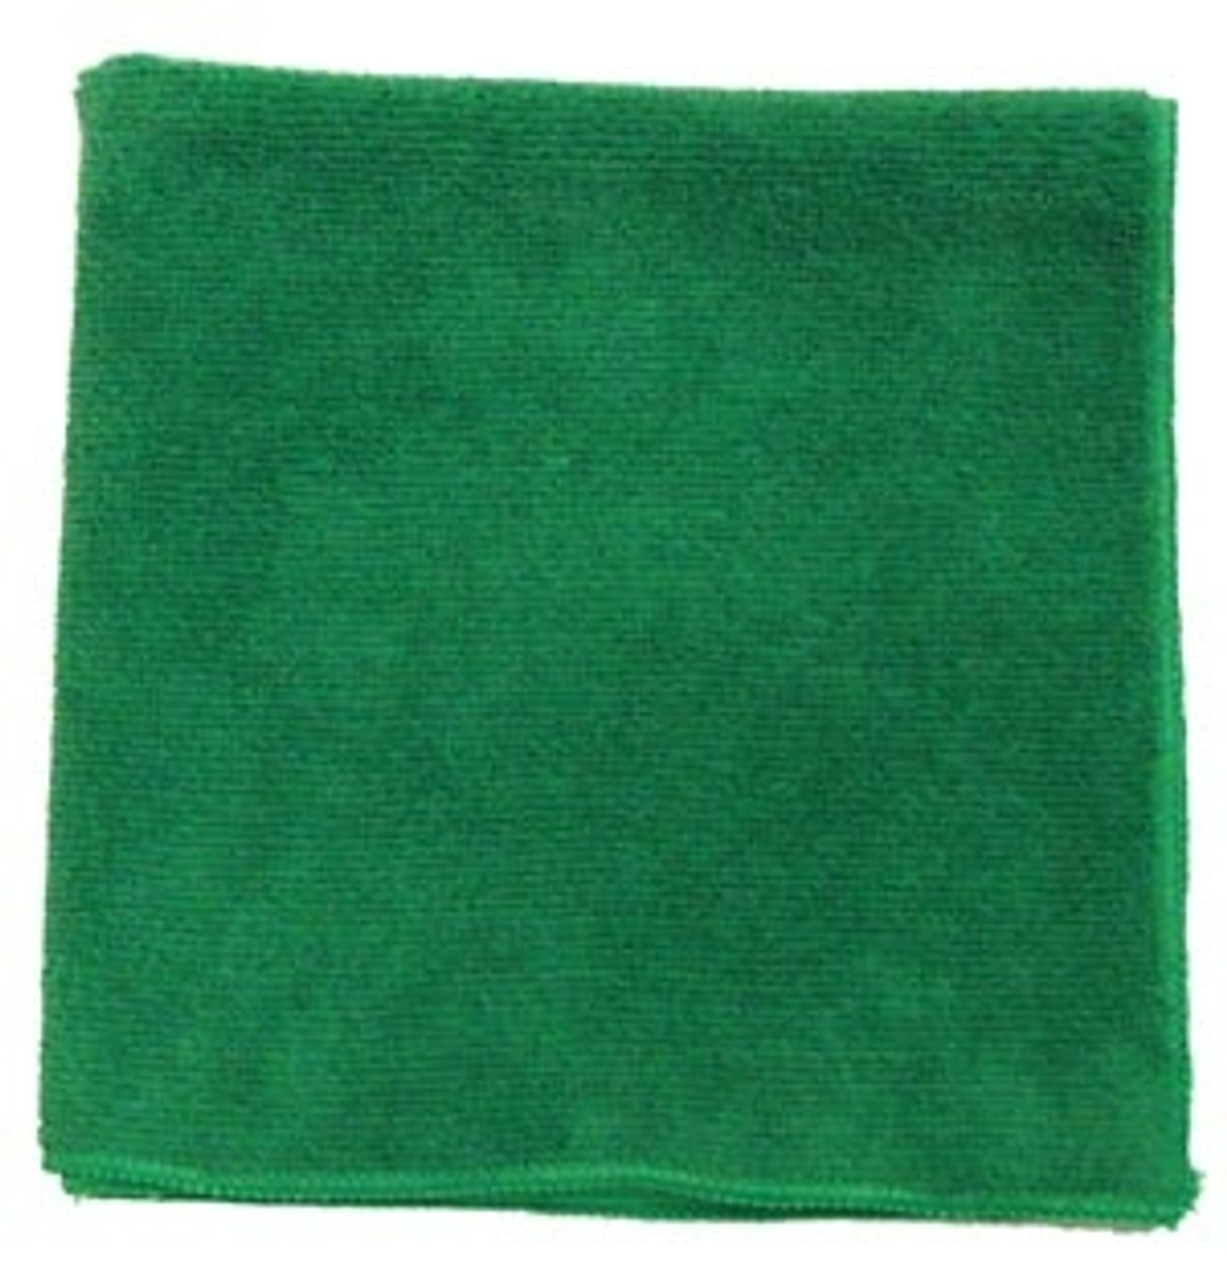 Microfiber Towel Green 230 GSM 12 Inch x 12 Inch (DROP SHIP ONLY from Golden Star Inc. - $100 minimum order for prepaid freight outside the continental U.S. $50 dollar minimum order inside the continental U.S.)